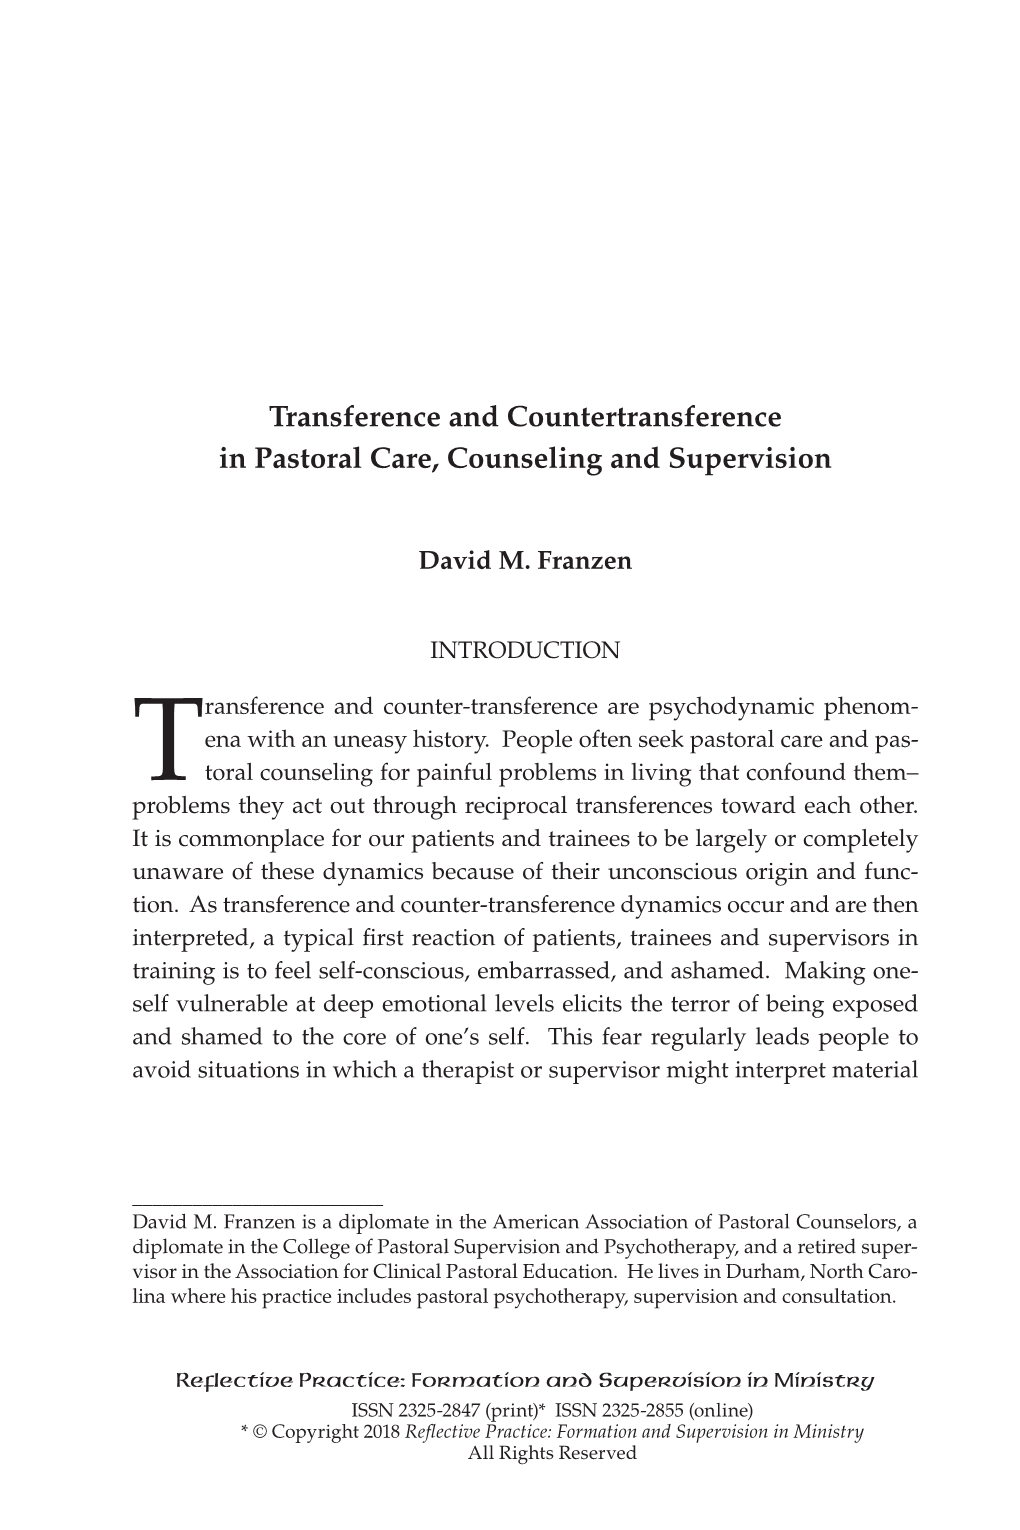 Transference and Countertransference in Pastoral Care, Counseling and Supervision